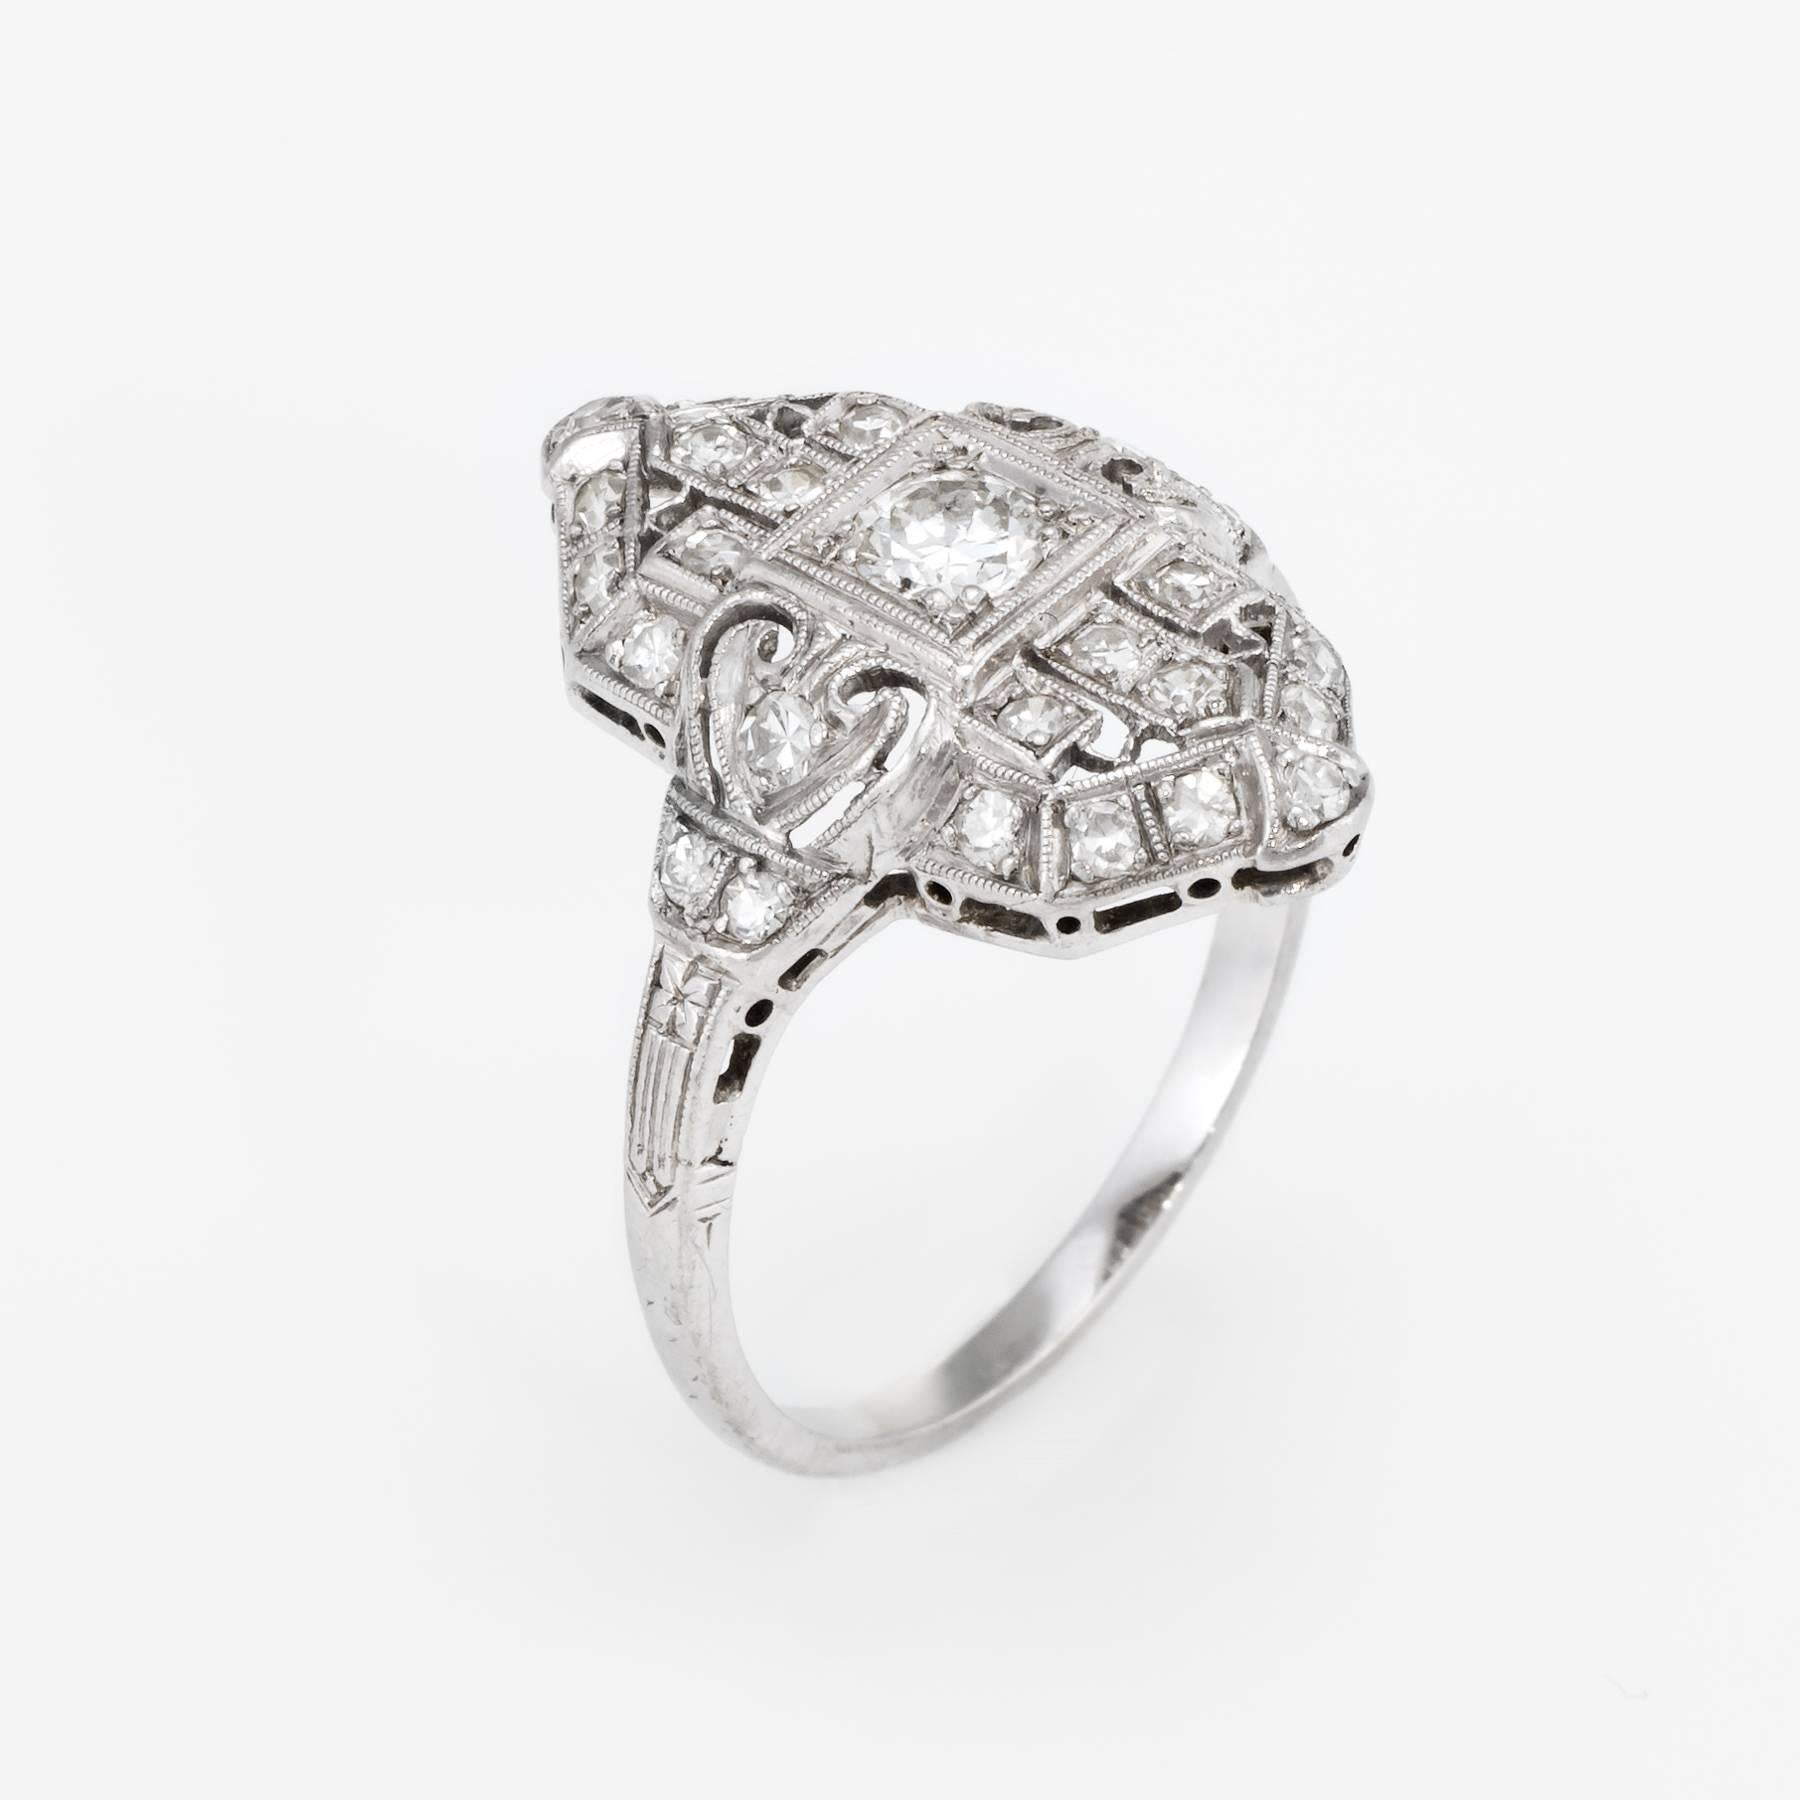 Finely detailed vintage Art Deco era ring (circa 1920s to 1930s), crafted in 900 platinum. 

Centrally mounted estimated 0.25 carat old European cut diamond is accented with an estimated 0.38 carats of single cut diamonds. The total diamond weight